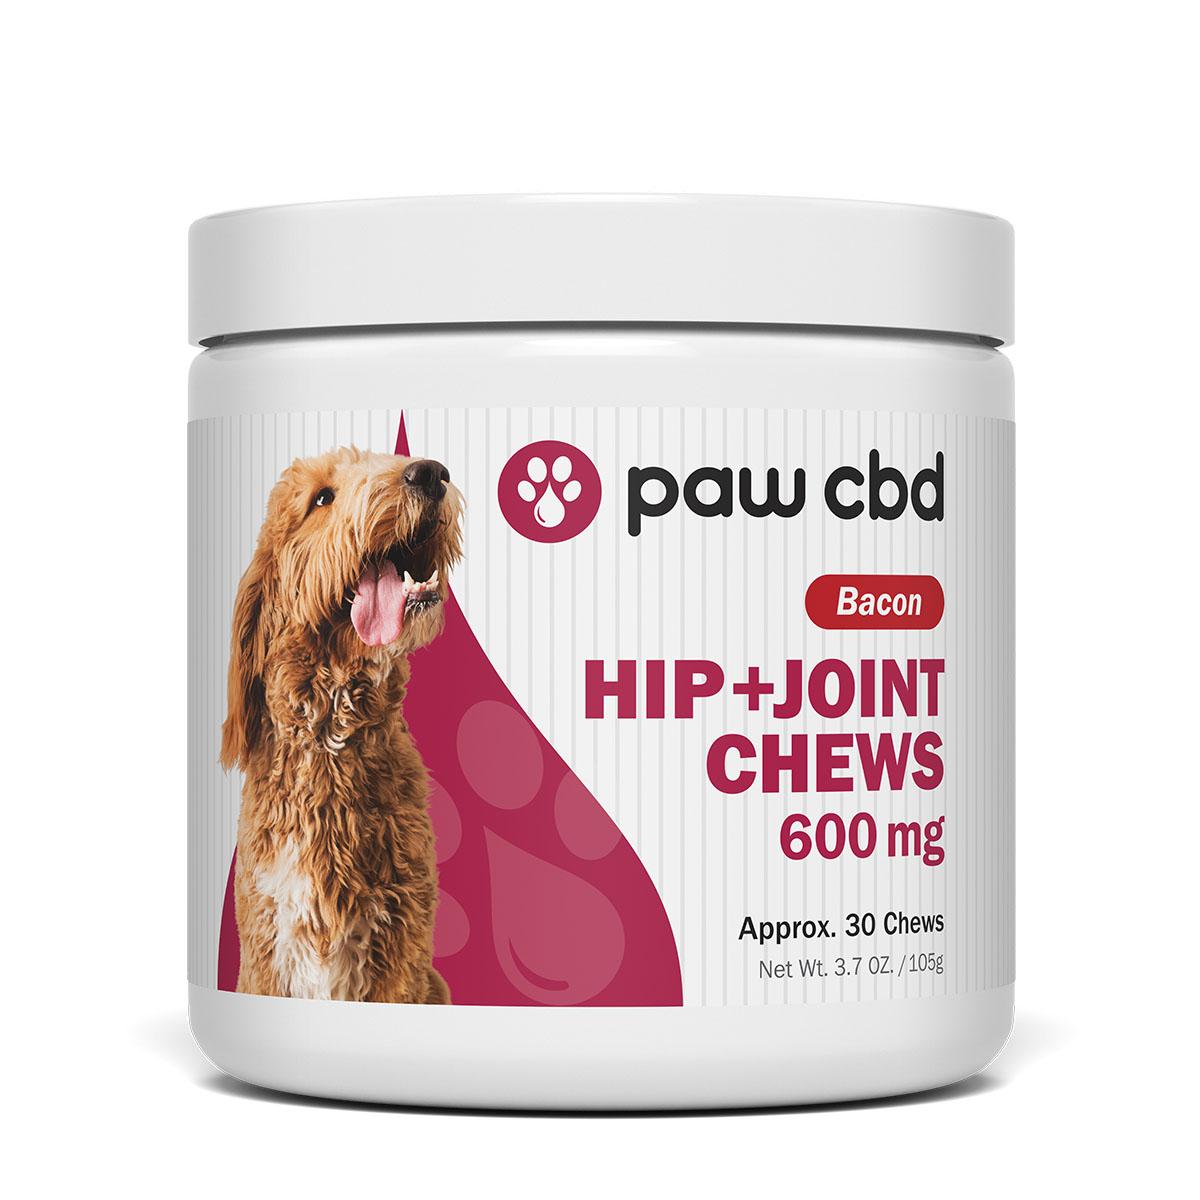 cbdMD Paw CBD Hip & Joint Soft Chews for Large Dogs - Bacon - 600 mg, 30 Count